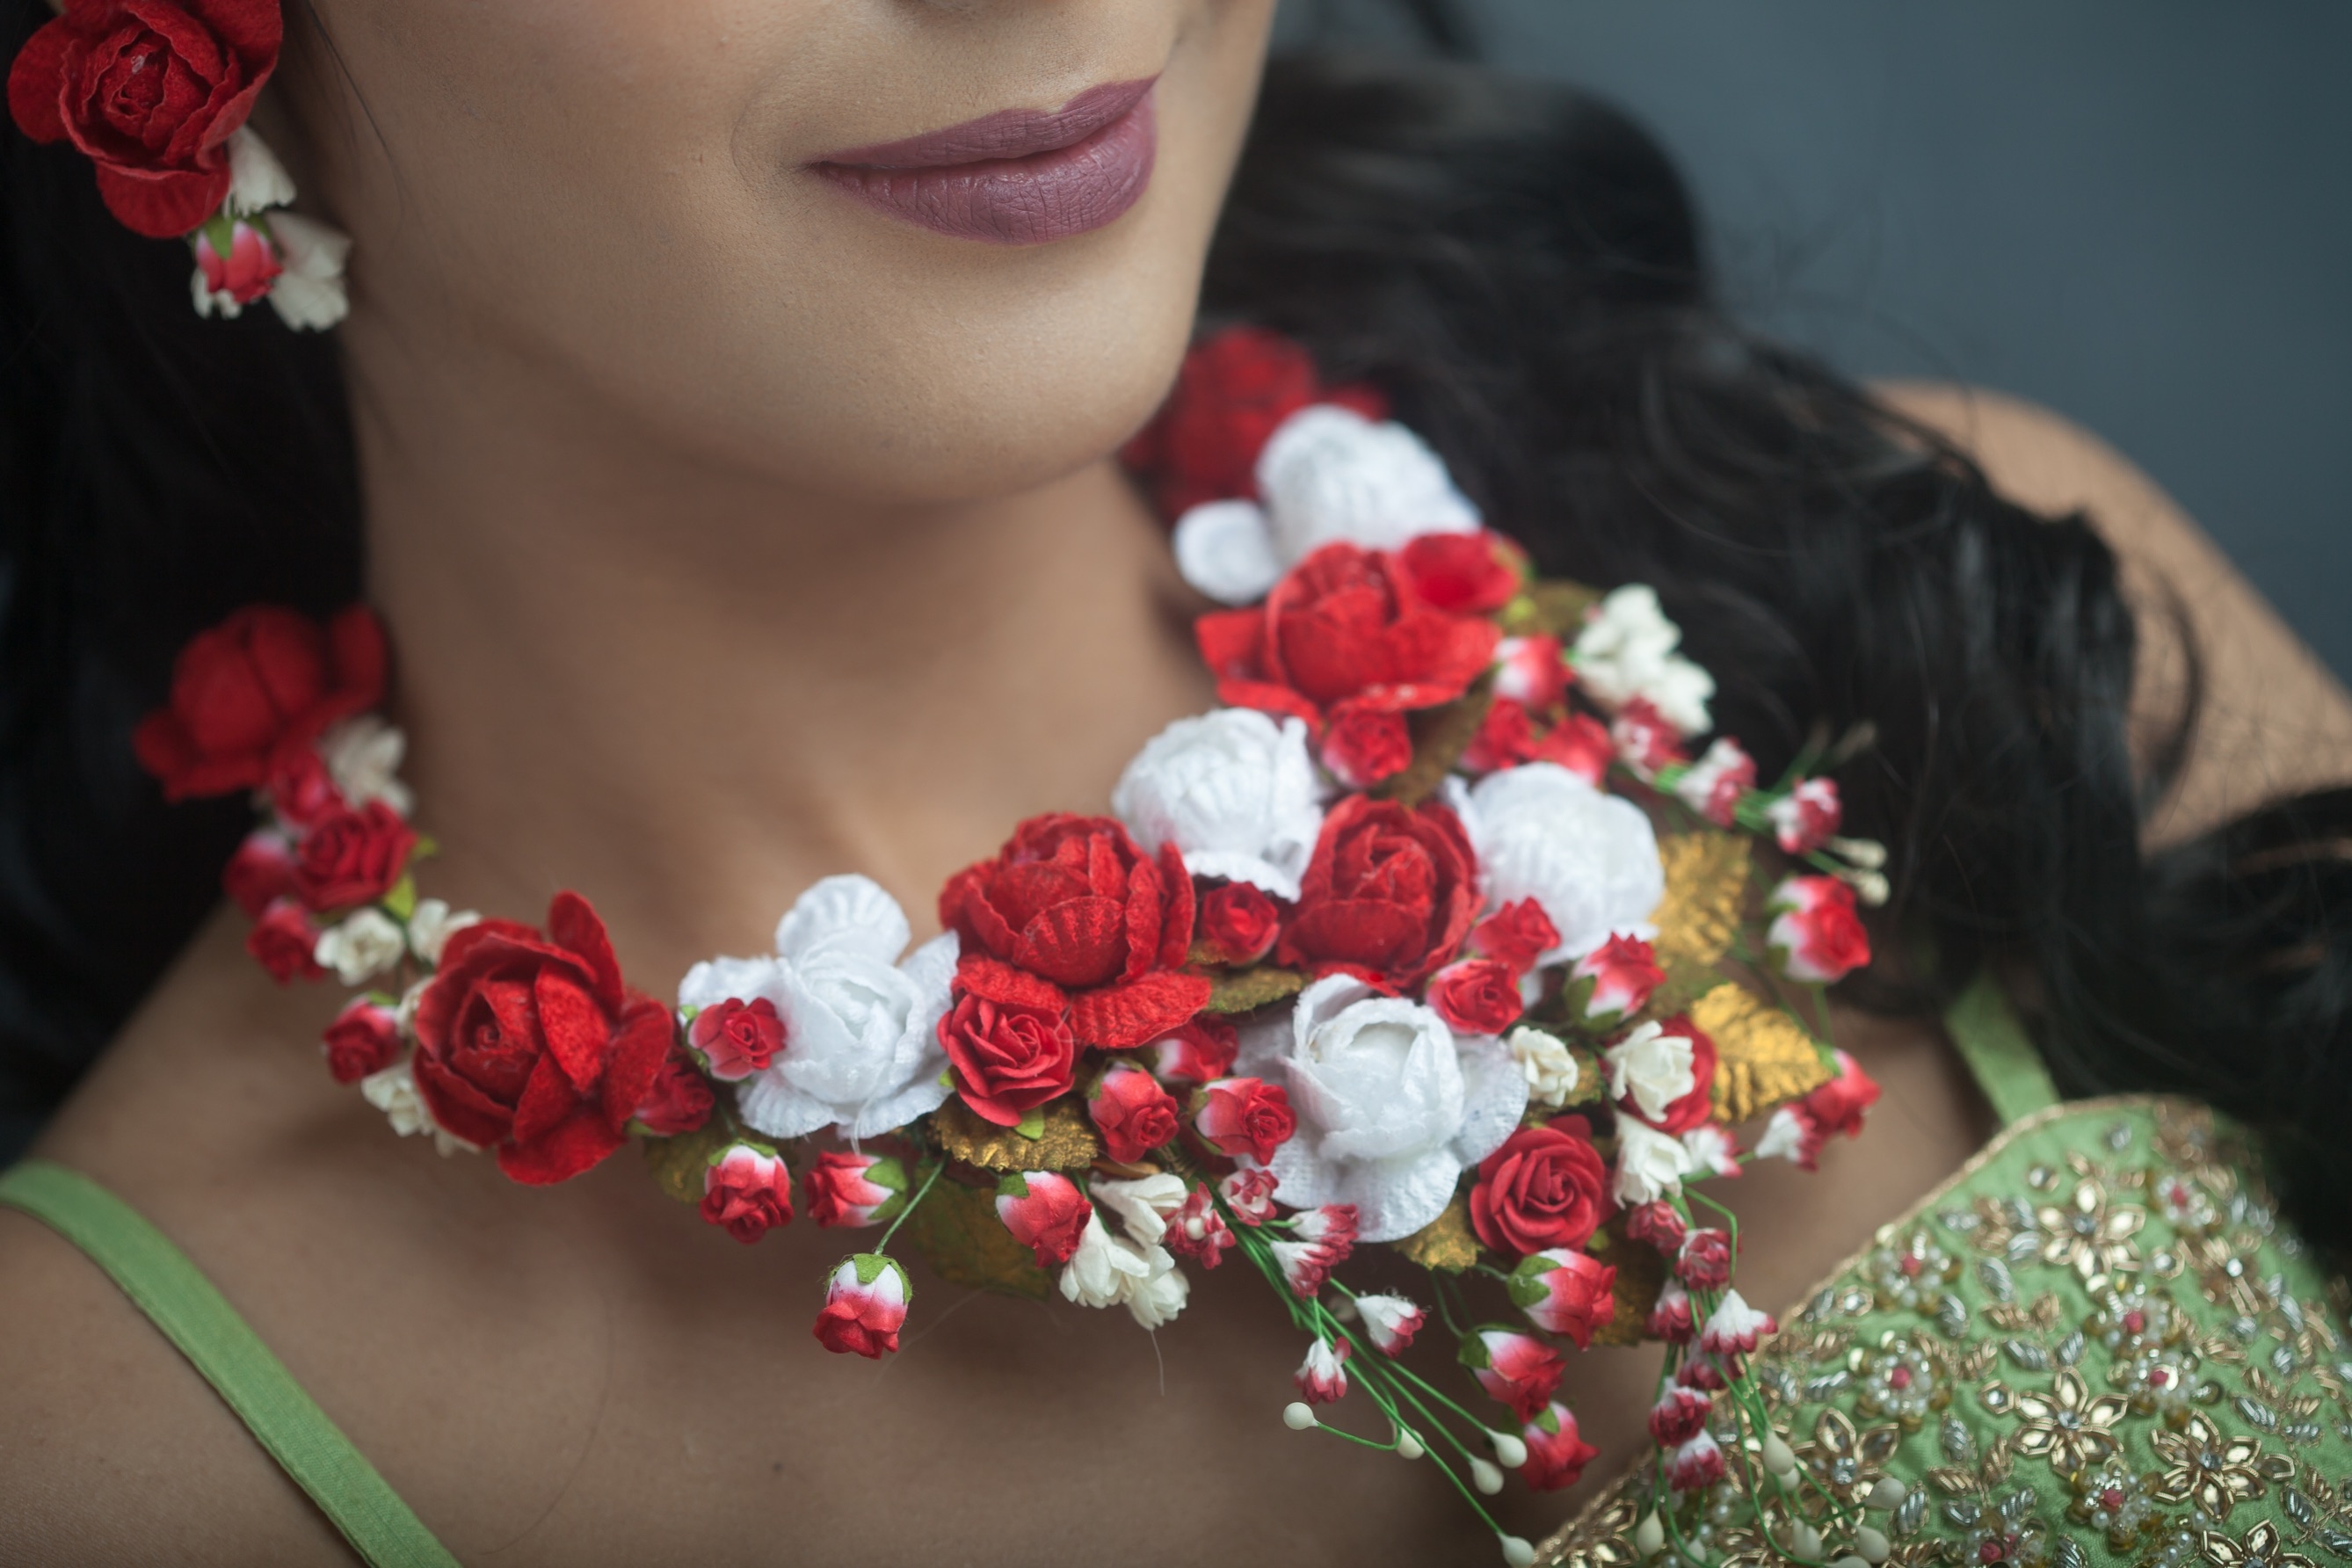 Floral art | Red & White Floral Necklace For Women undefined